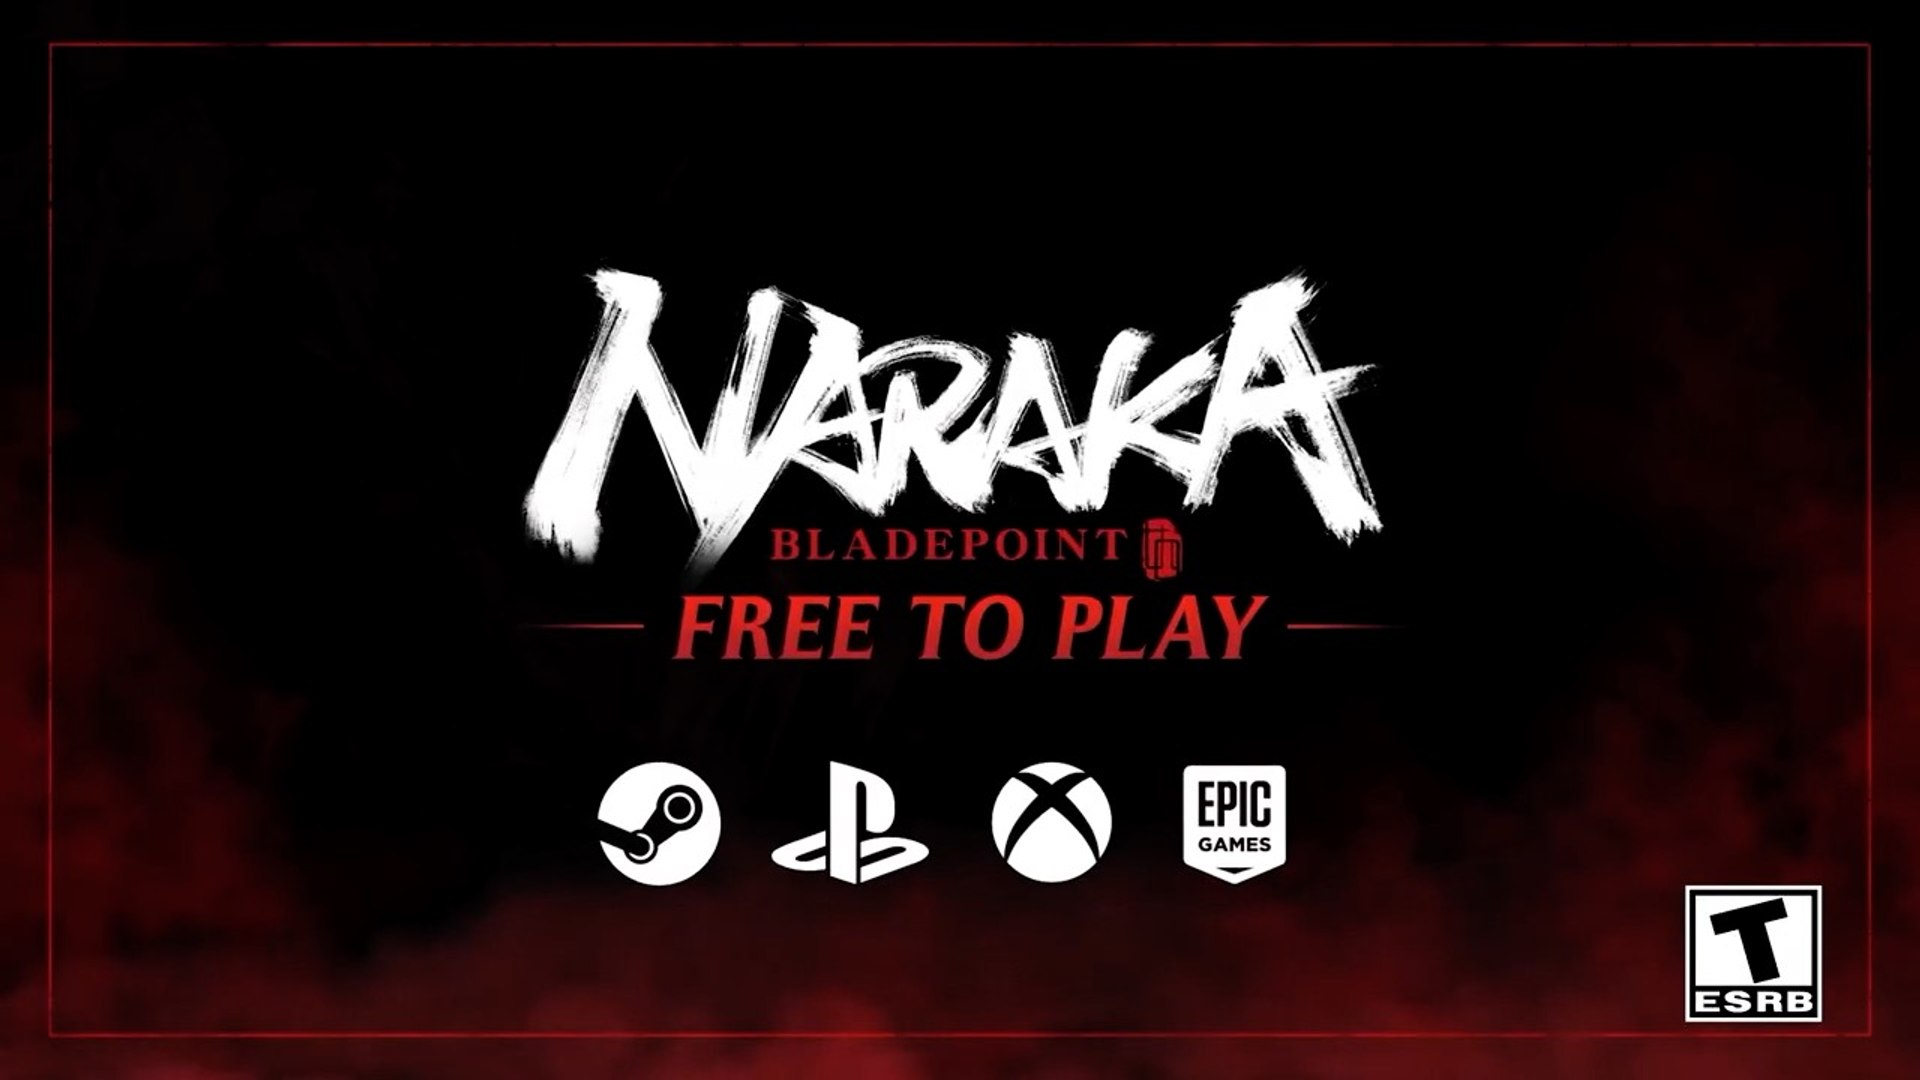 Naraka: Bladepoint Is Now On PS5 And Free-To-Play Across All